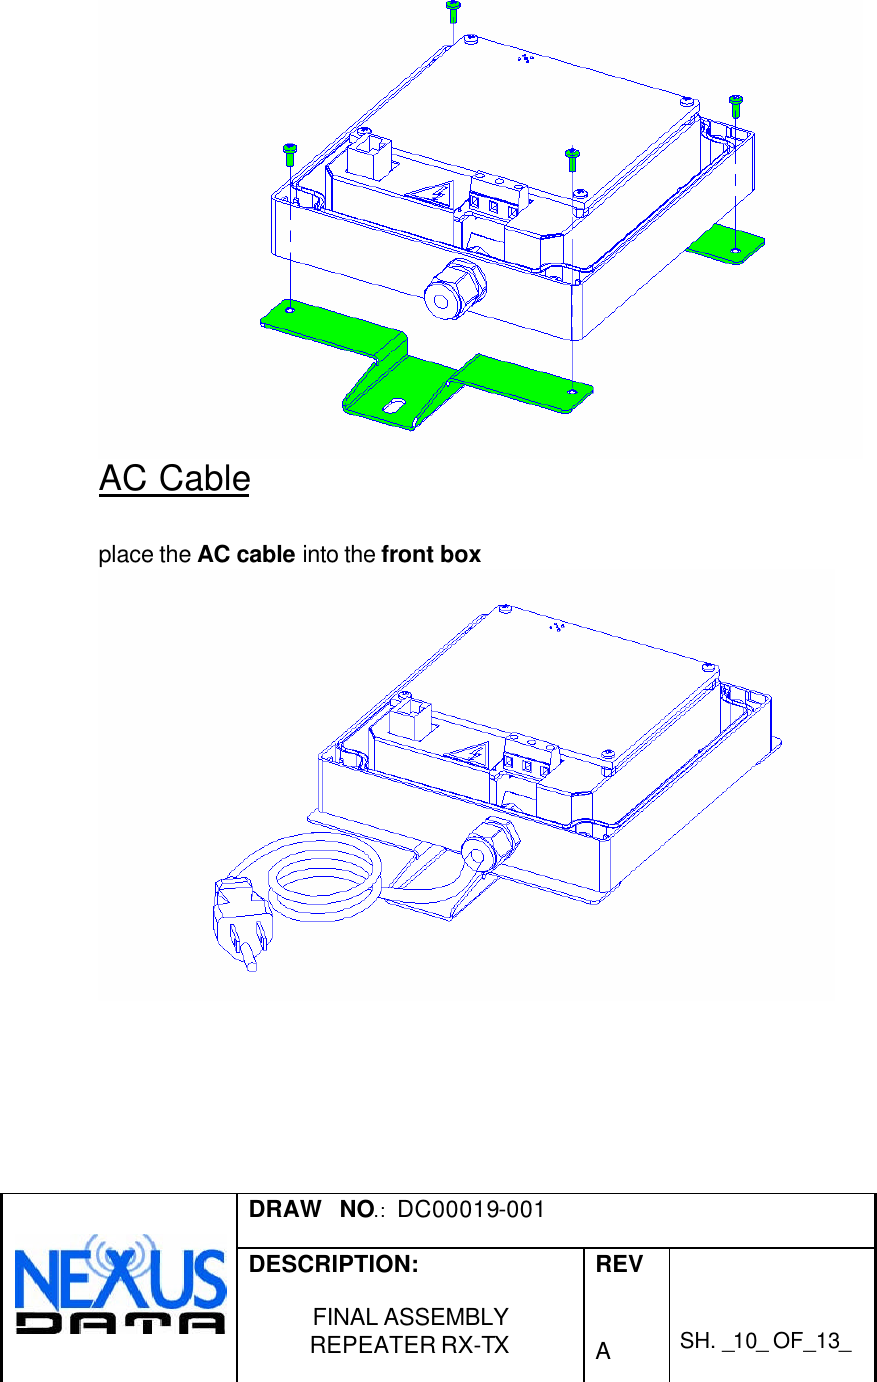  DRAW   NO.:  DC00019-001   DESCRIPTION:  FINAL ASSEMBLY REPEATER RX-TX  REV   A    SH. _10_ OF_13_    AC Cable  place the AC cable into the front box        